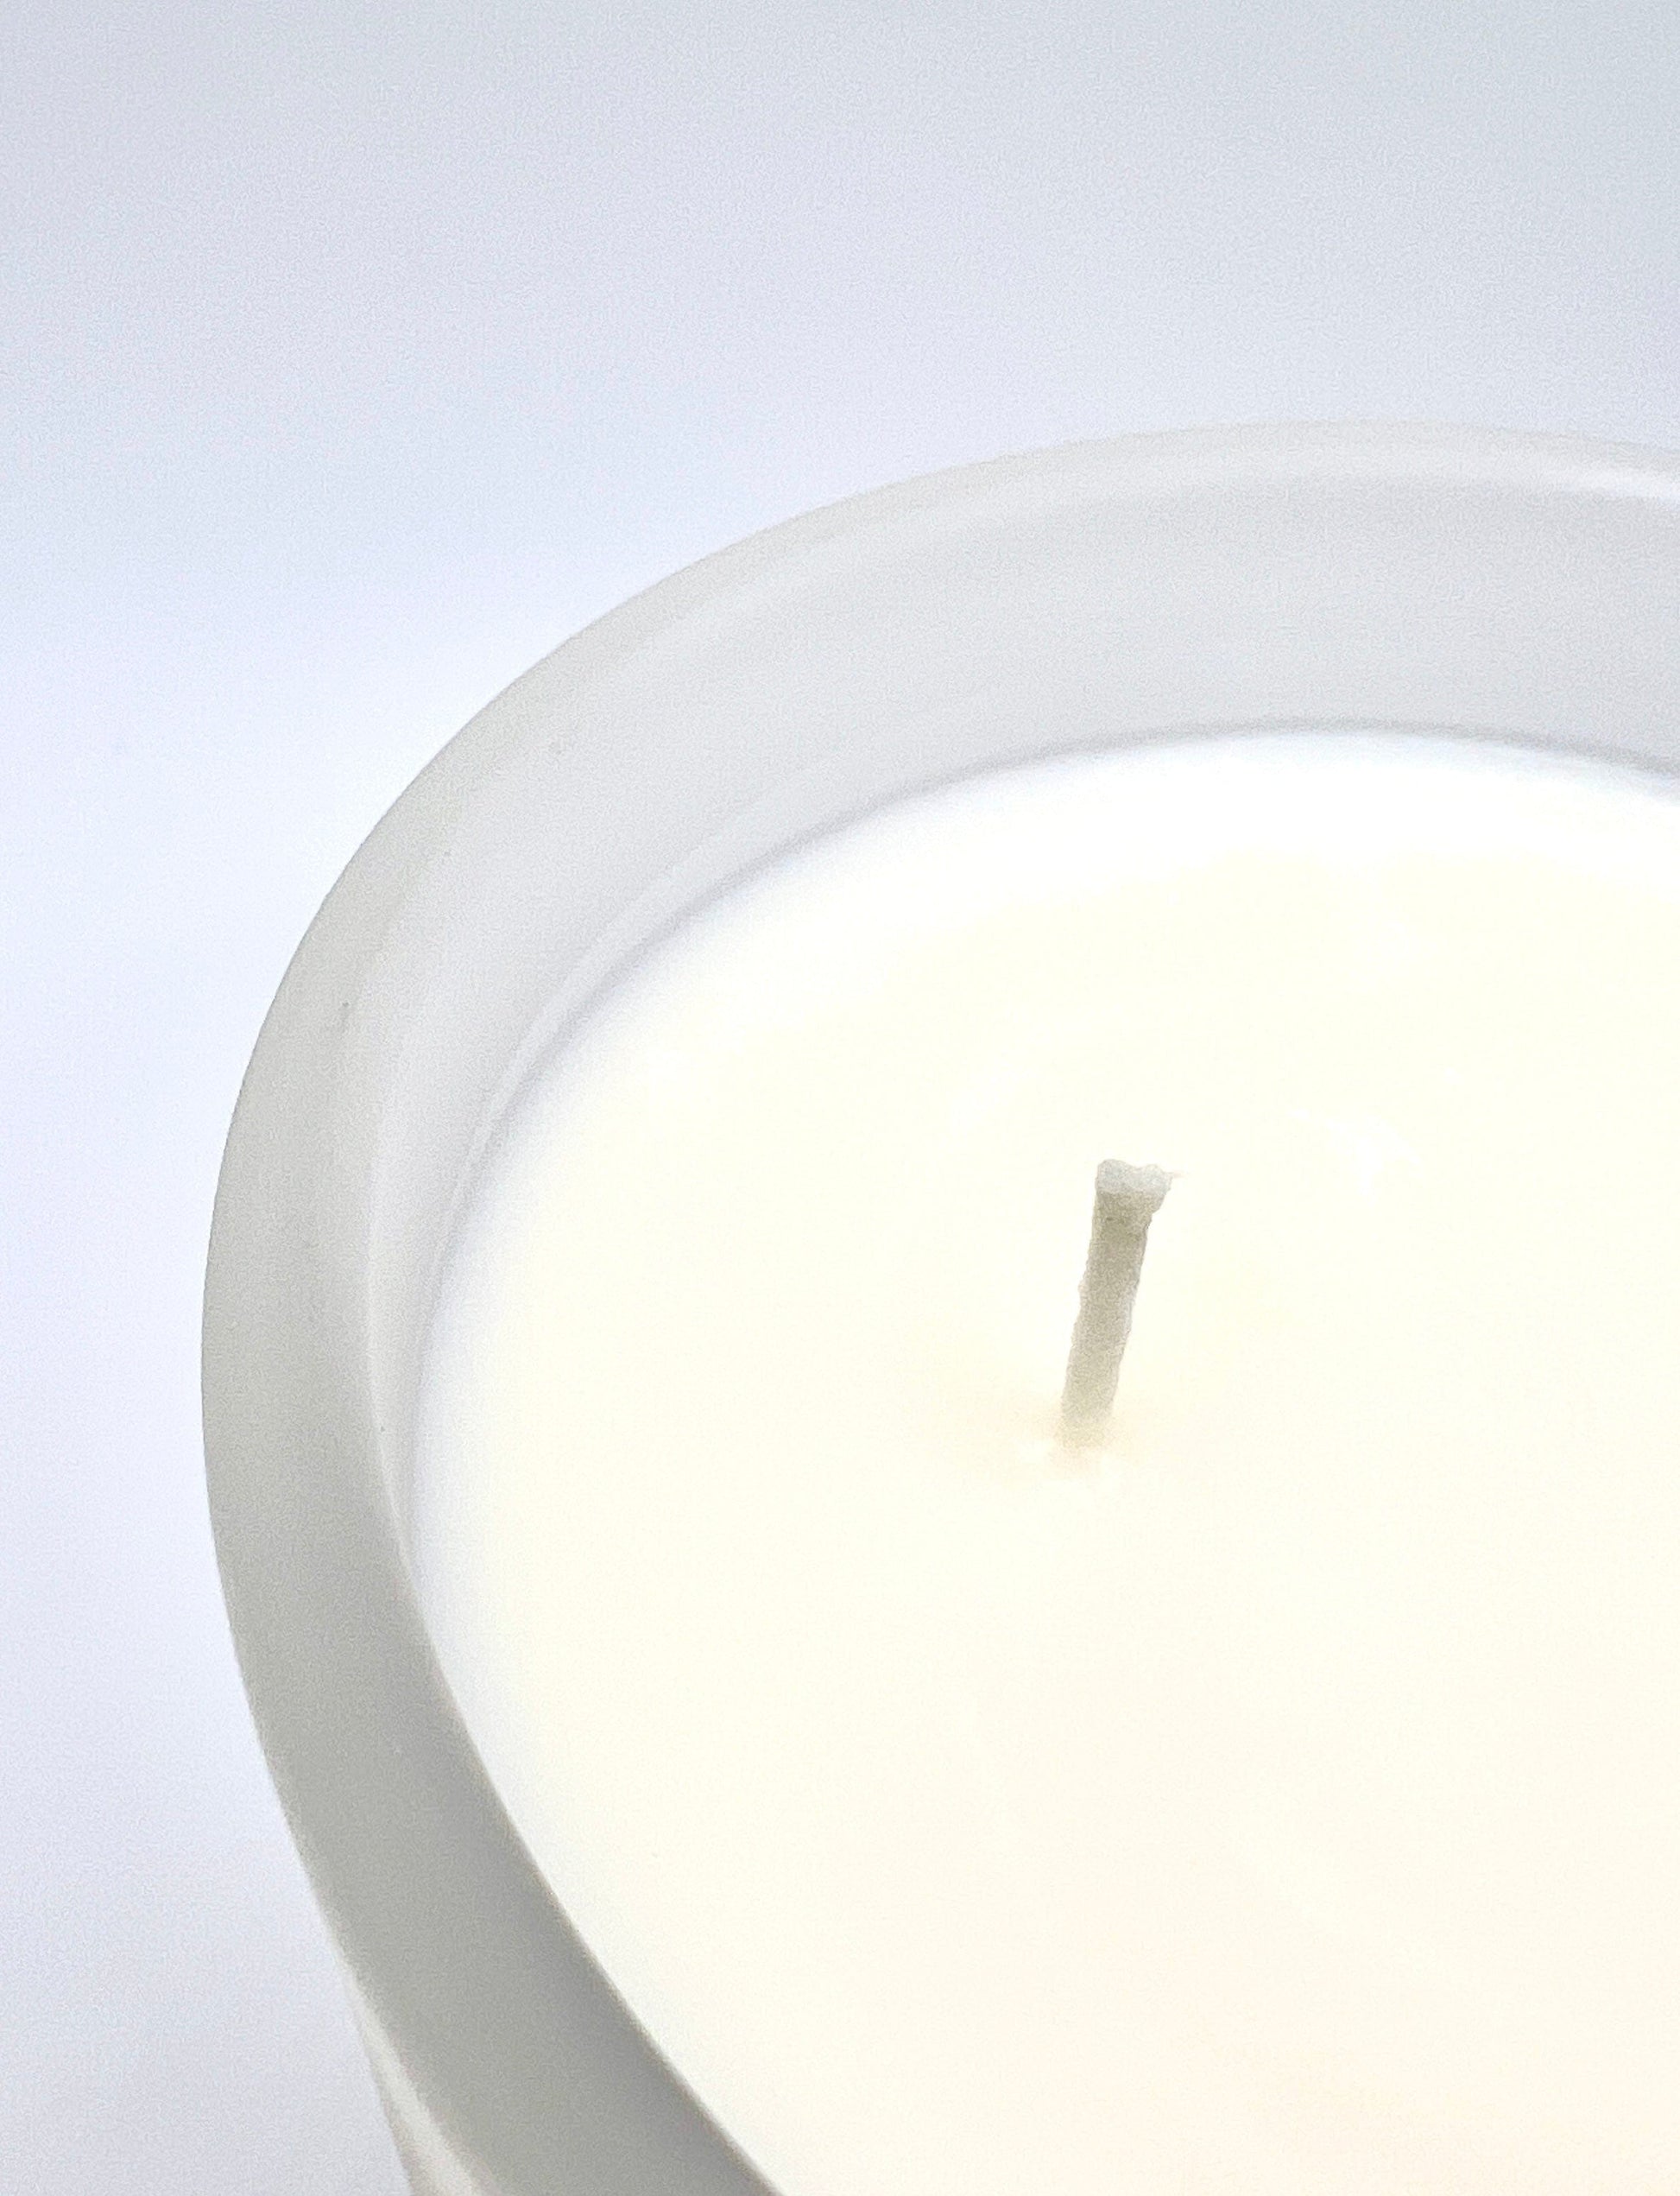 Can'tdles Blazemoche: Bonfire-Scented Candle